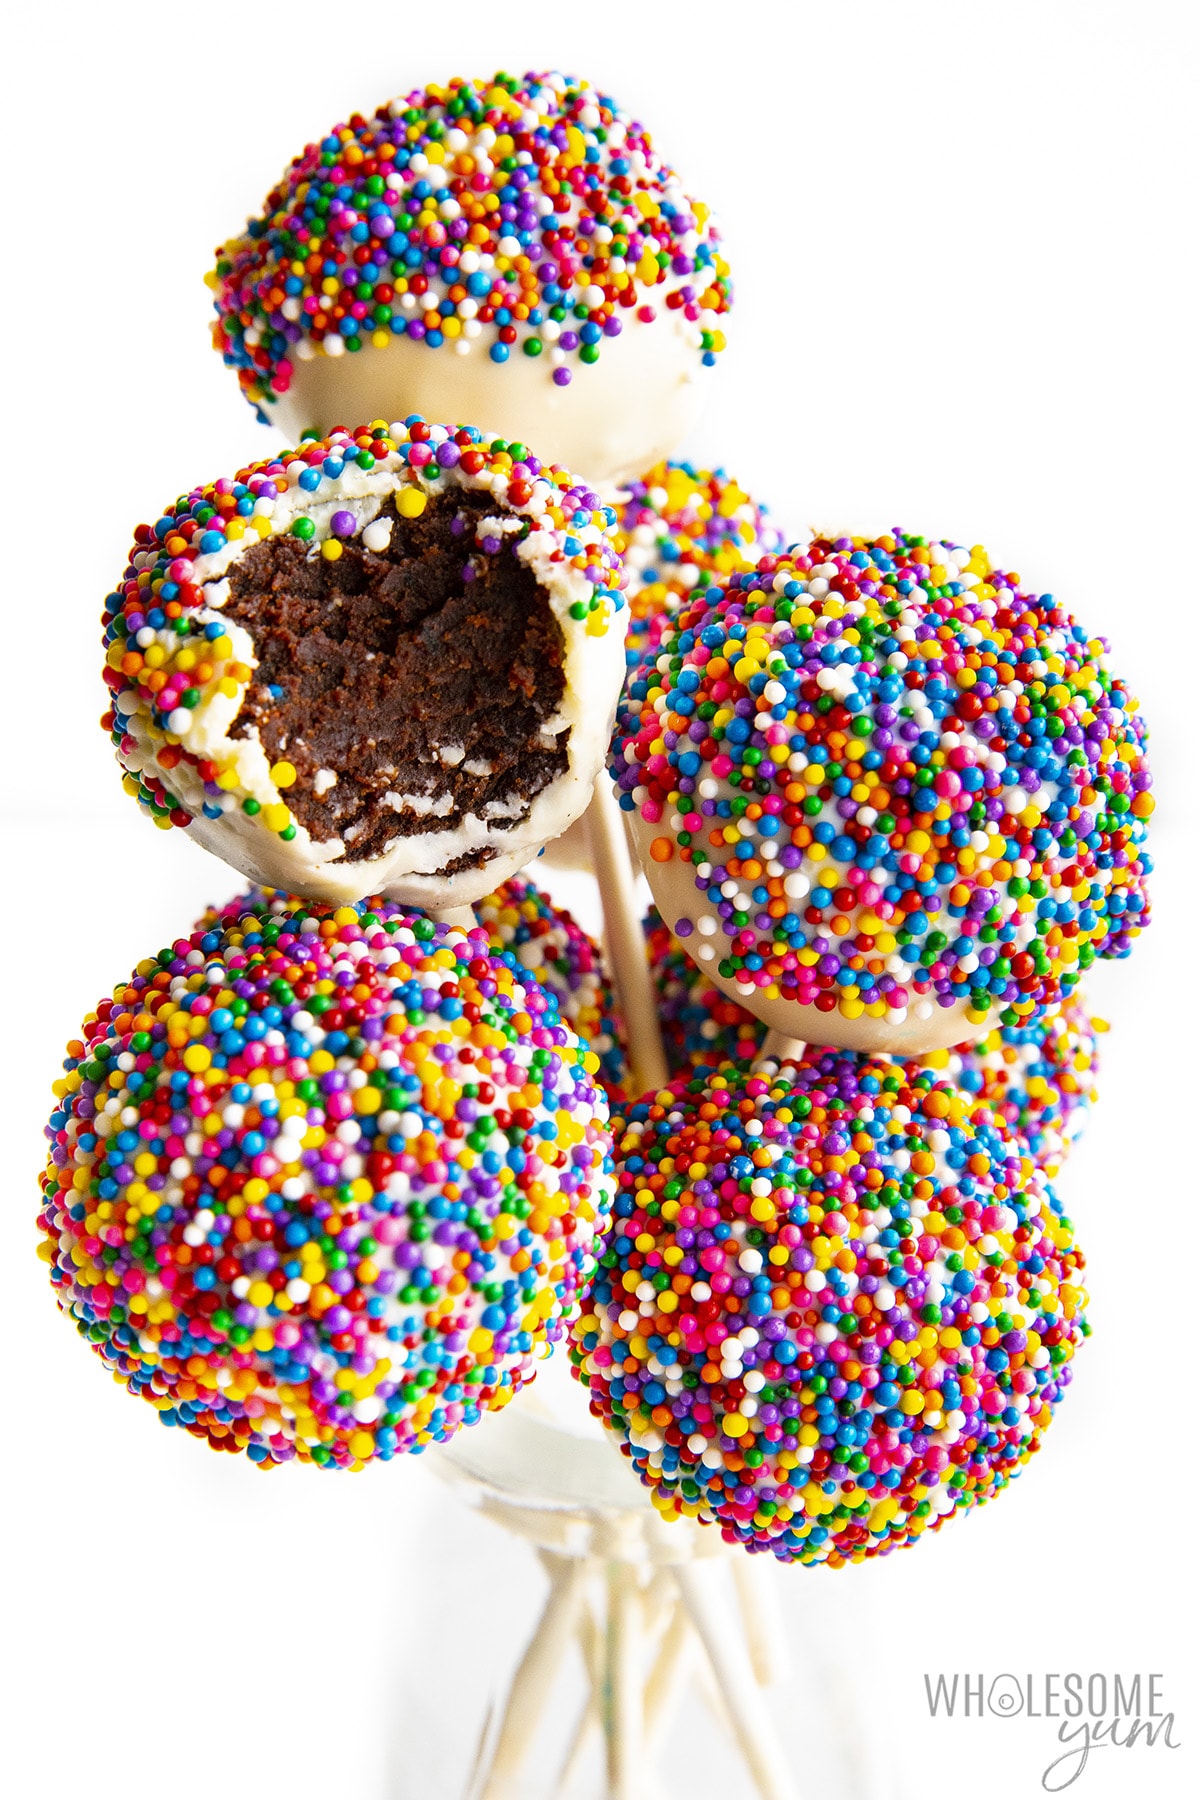 Sugar Free Cake Pops are made from one popcorn.